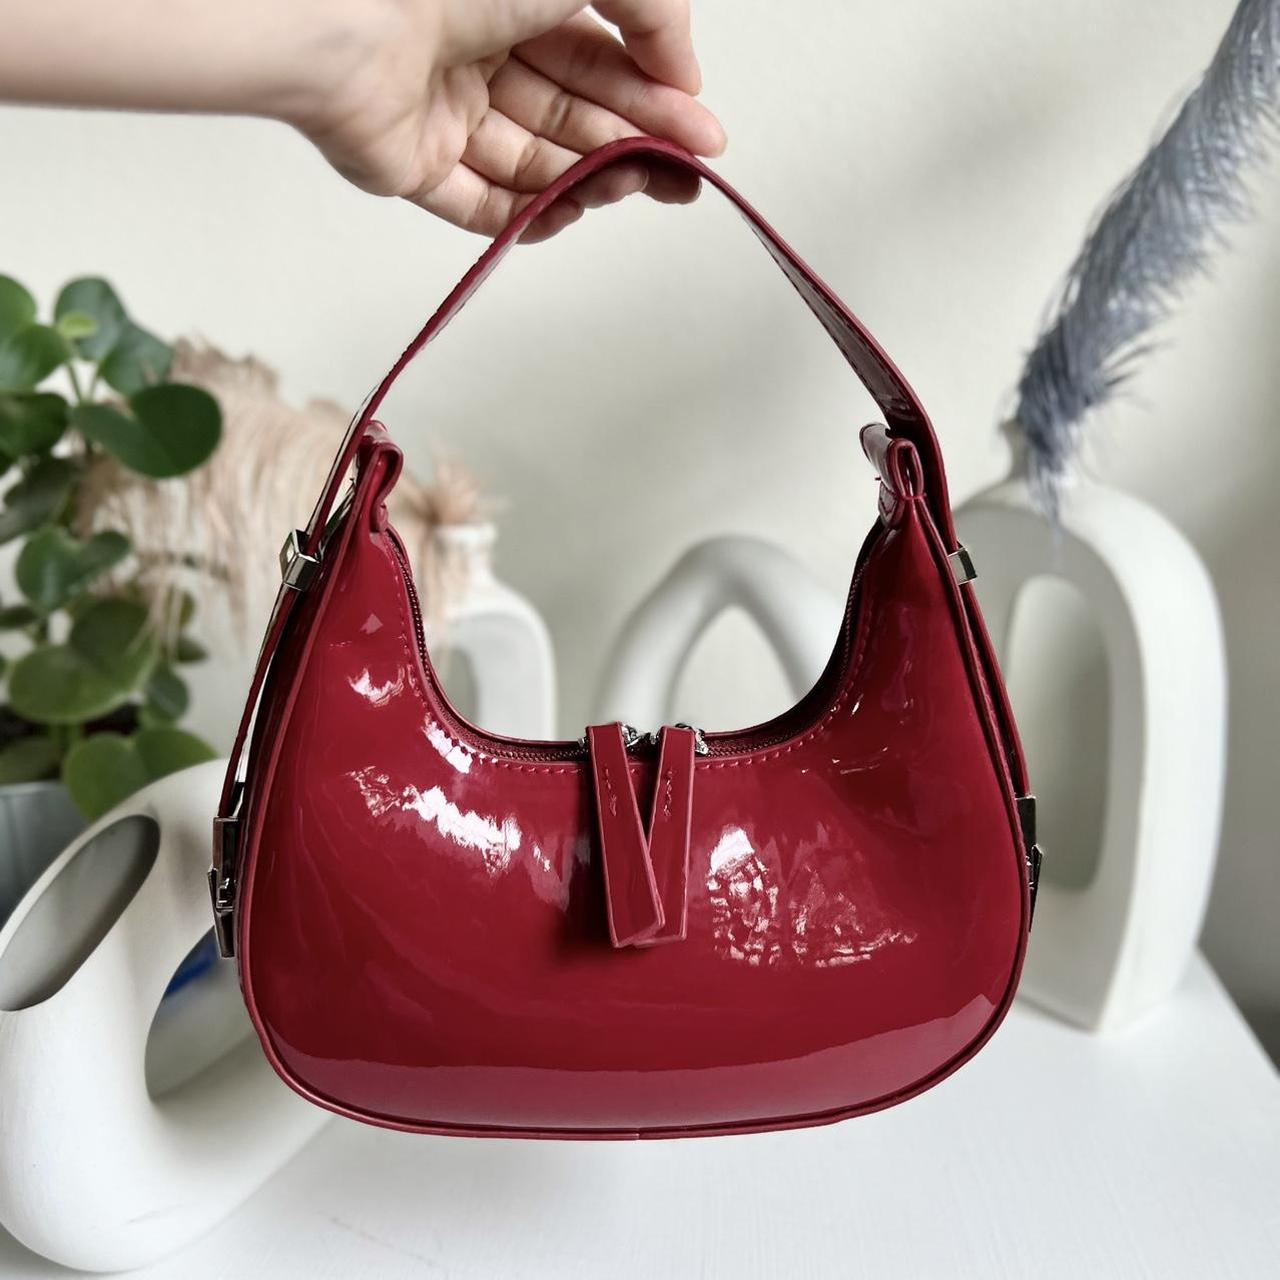 ♥️Red Patent Leather Hobo Bag♥️ Brand new super cute...